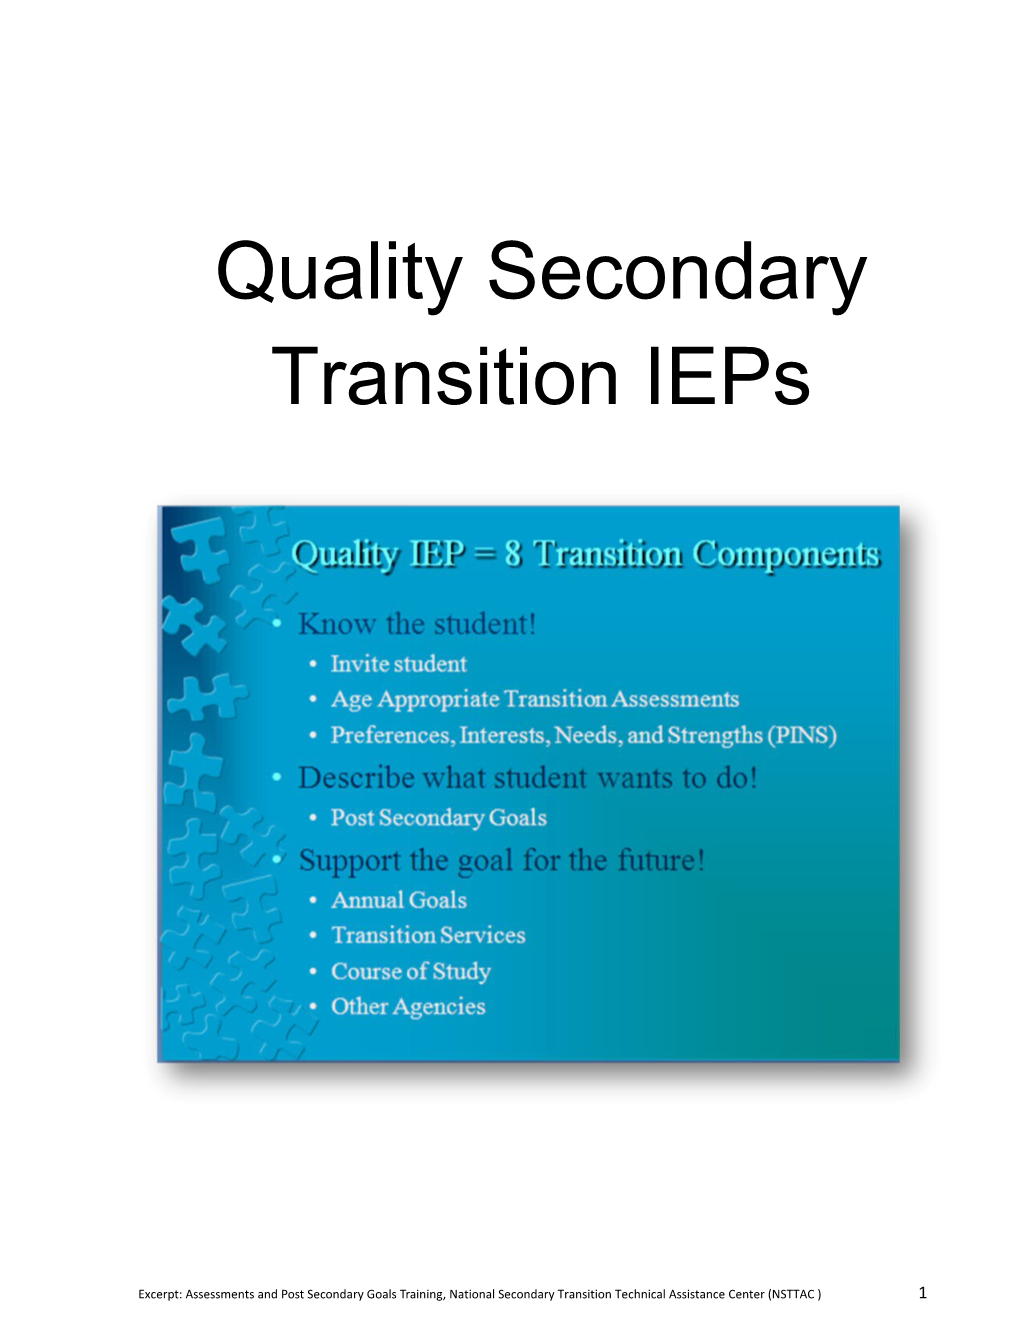 Quality Secondary Transition Ieps